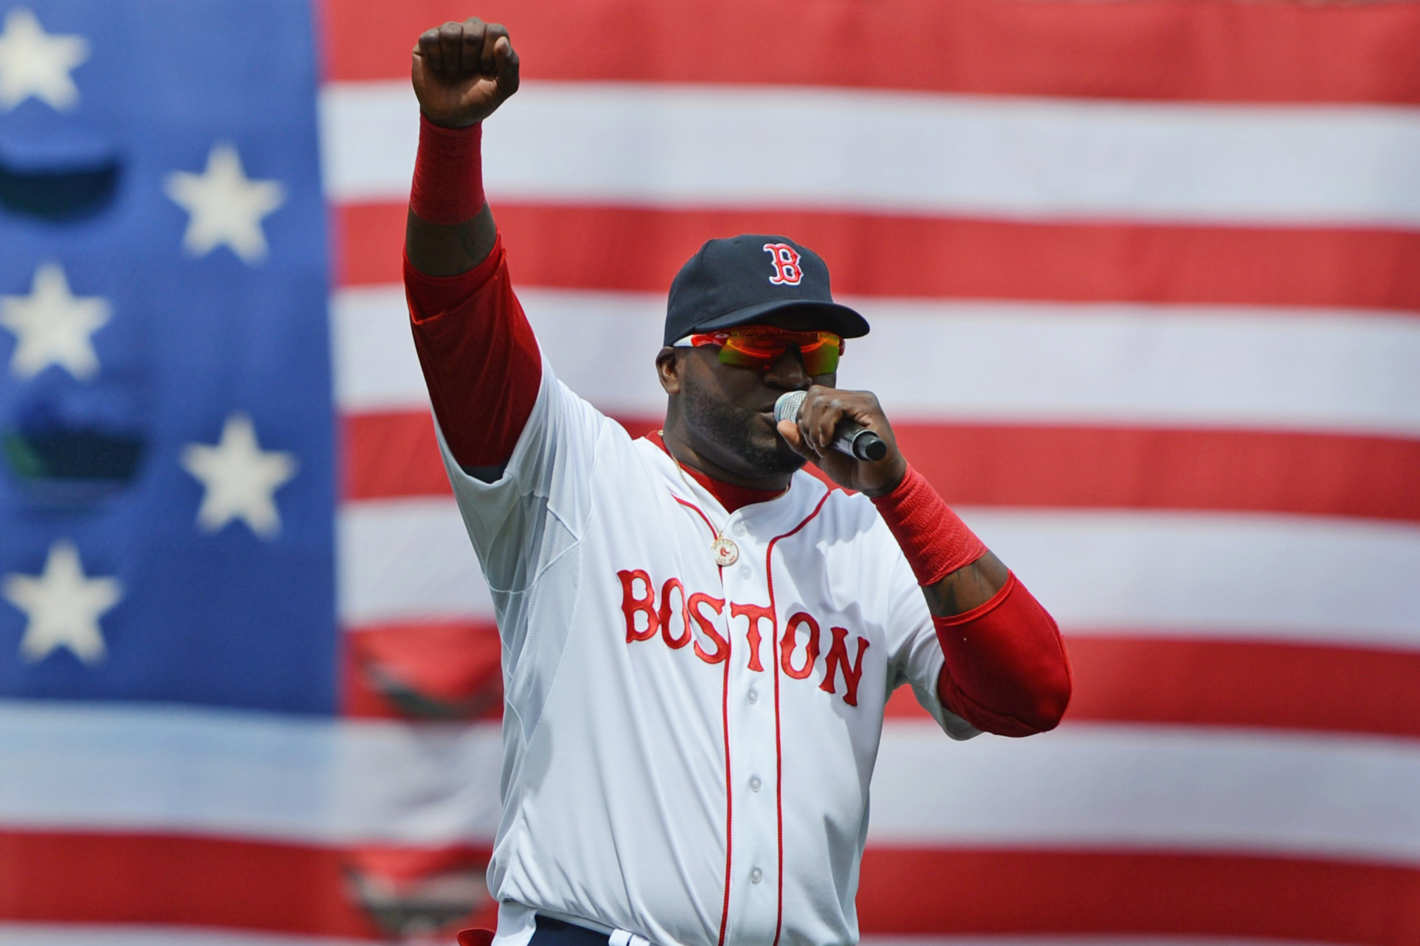 David Ortiz Takes One Step Back, Needs A Third Surgery